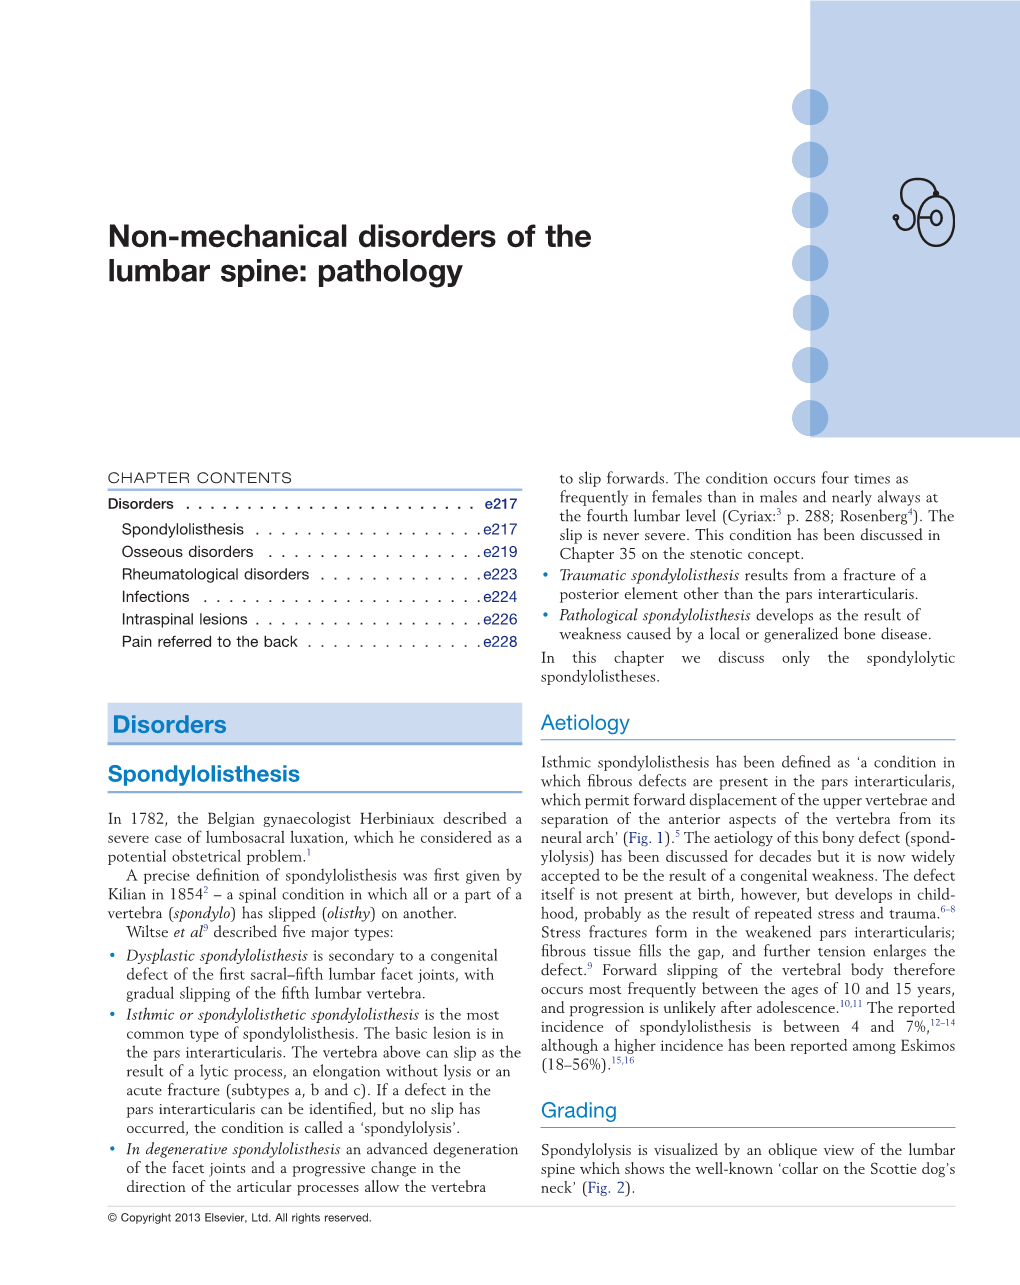 Non-Mechanical Disorders of the Lumbar Spine: Pathology